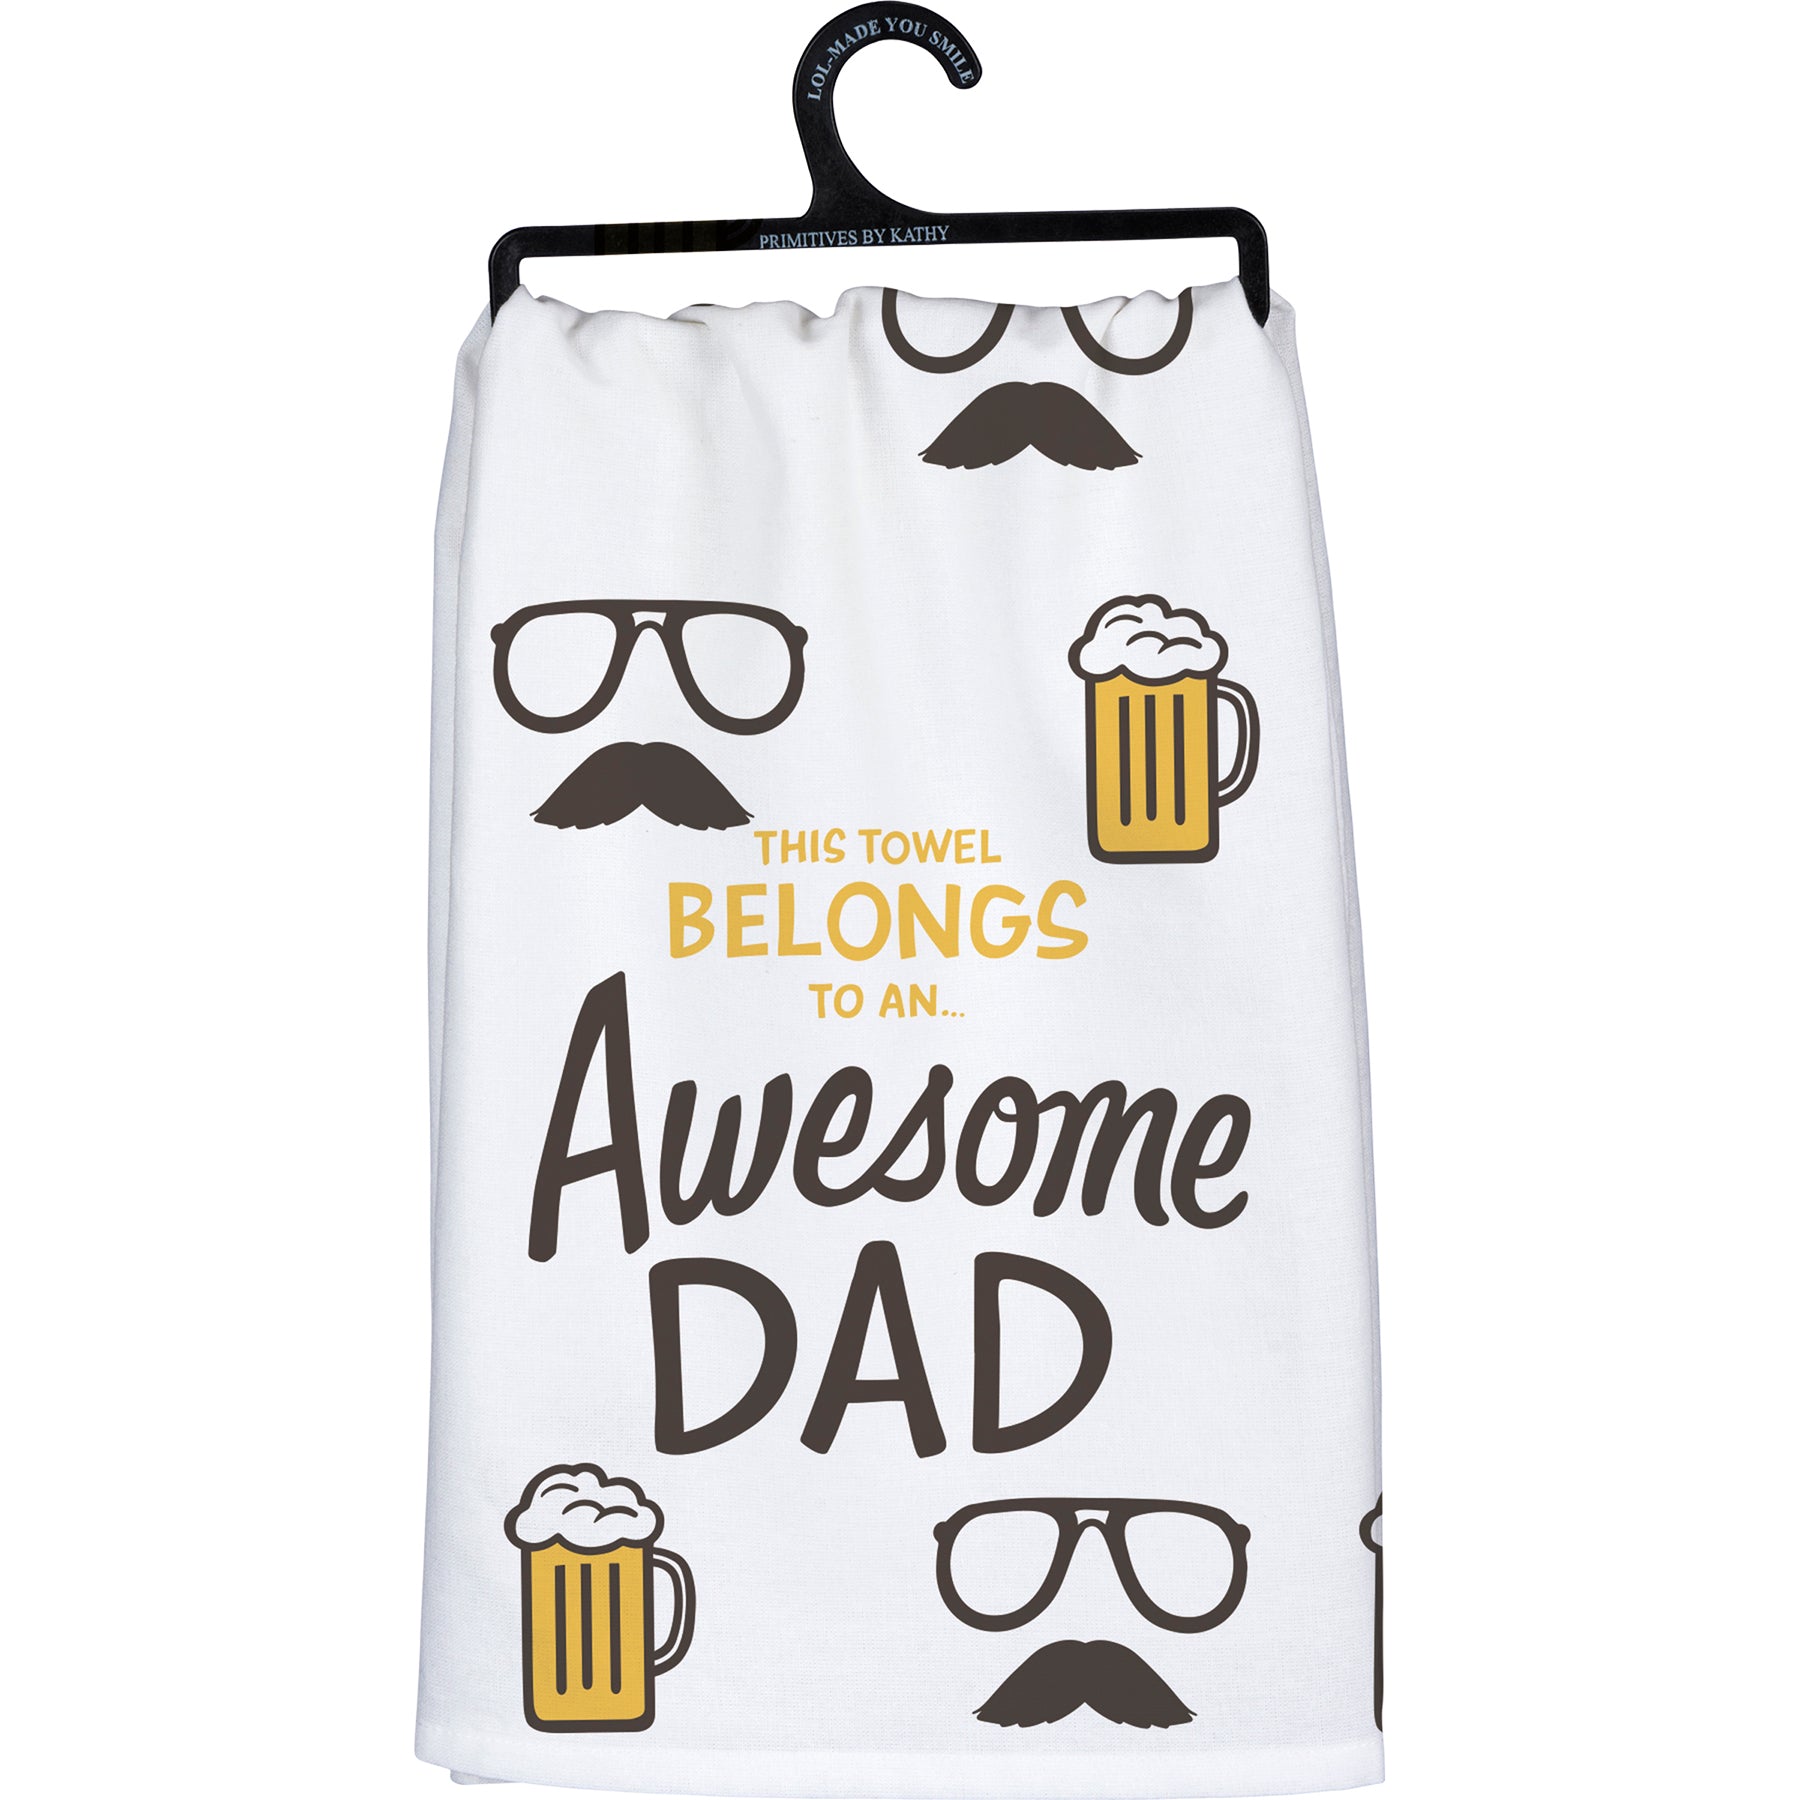 Awesome Dad cotton kitchen towel 